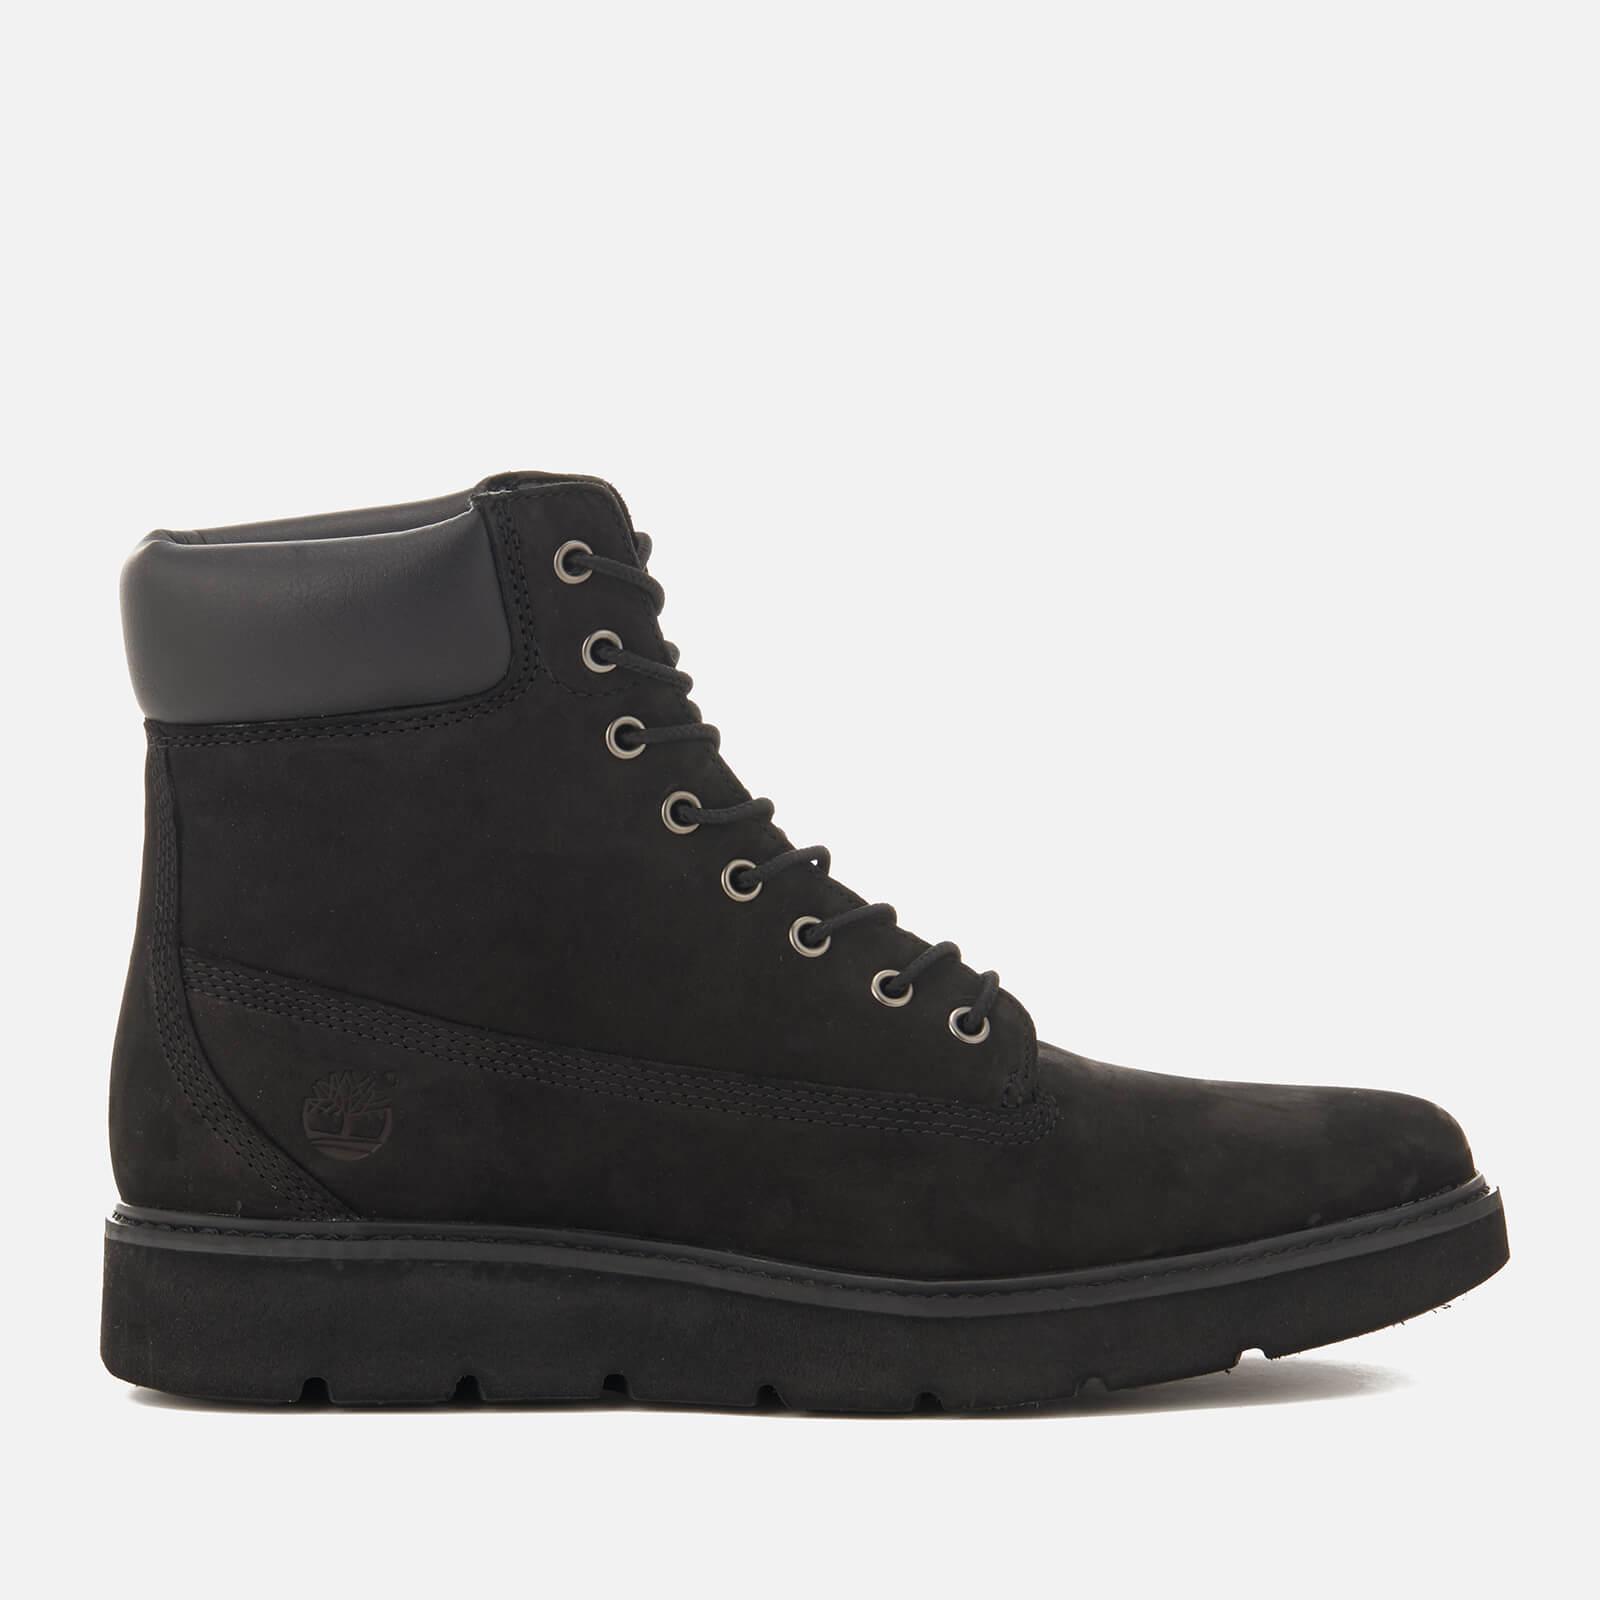 Timberland Kenniston 6 Inch Leather Lace Up Boots in Black - Lyst